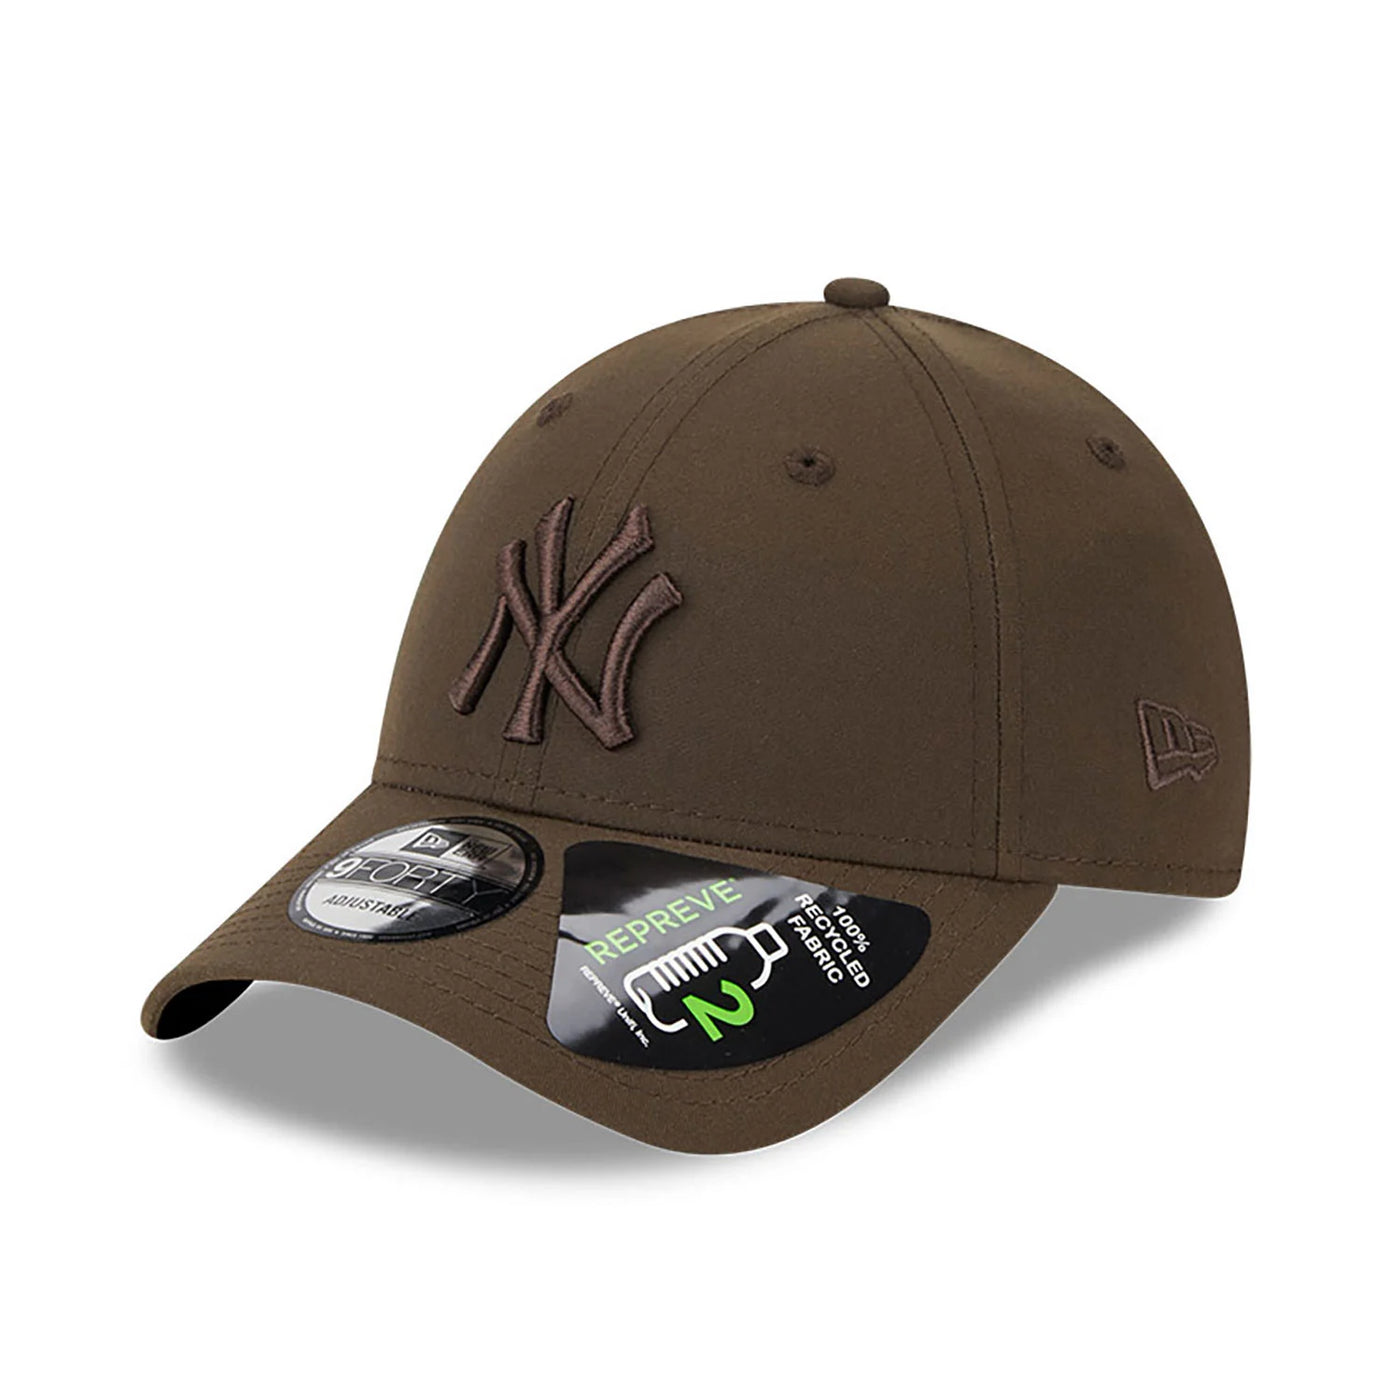 CAPPELLO 9FORTY NEW YORK YANKEES OUTLINE BROWN NEW ERA UOMO